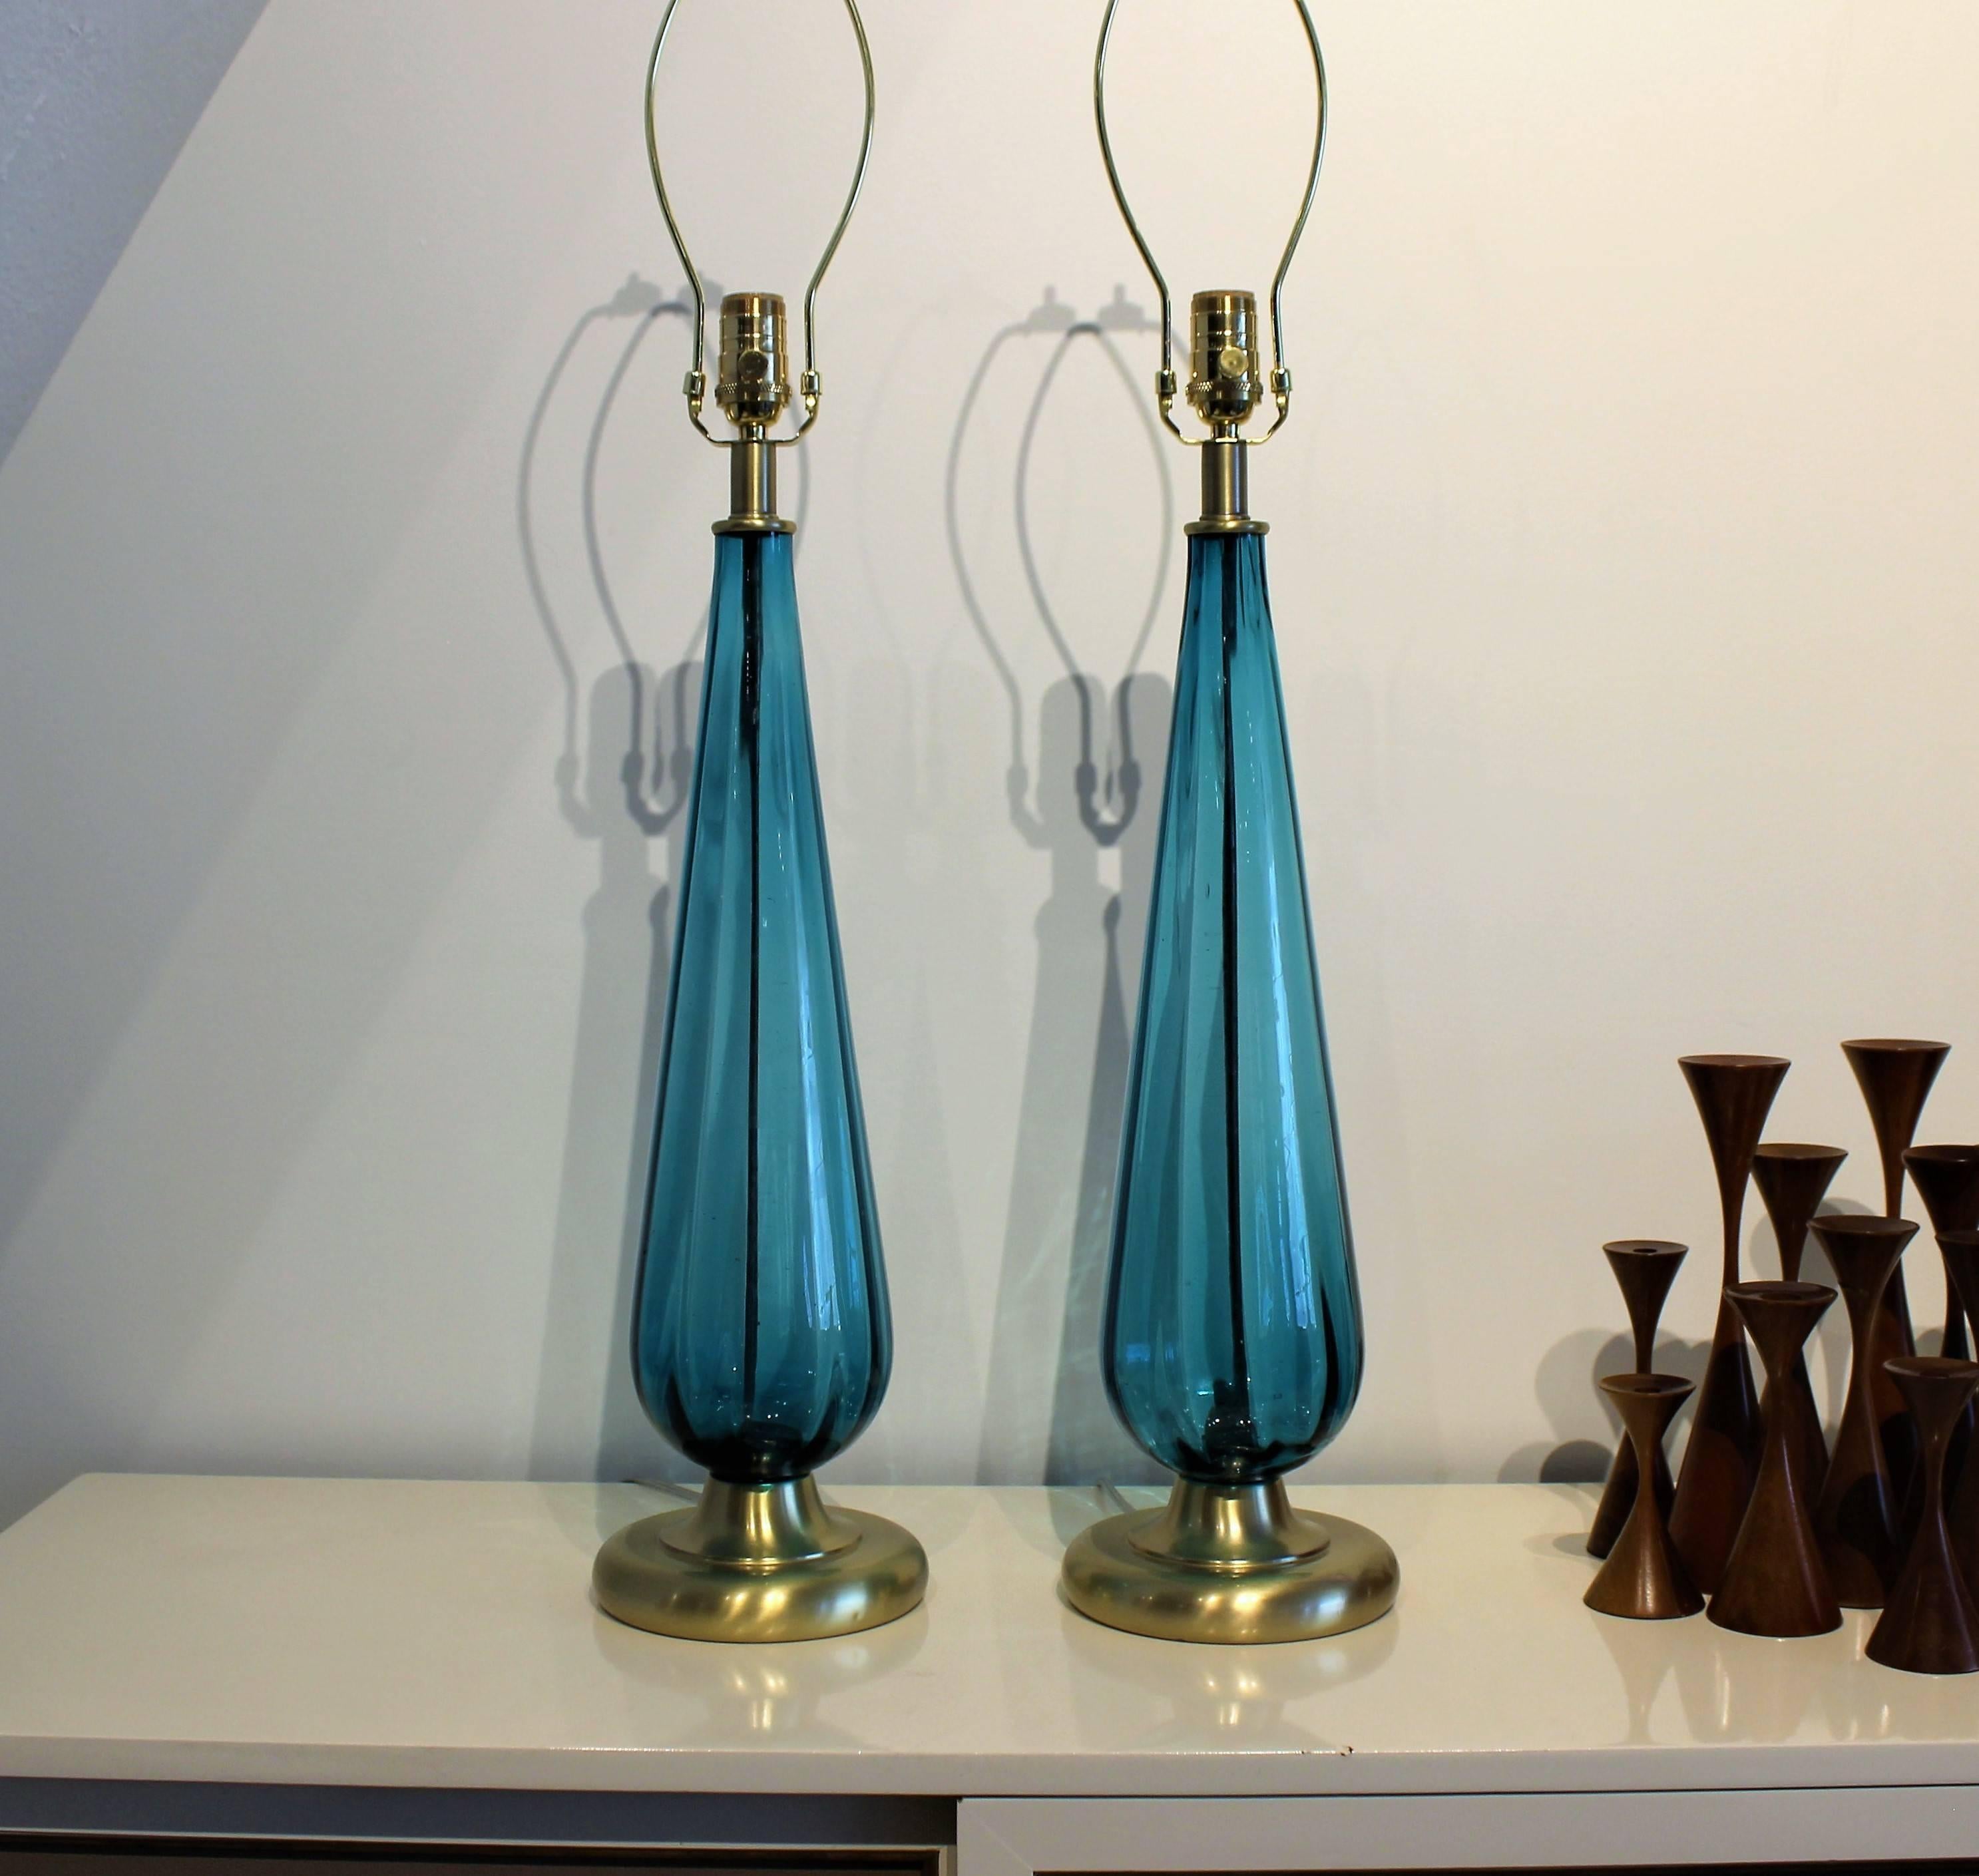 Large Murano glass lamps in cyan blue green, Italy 1960s. Handblown glass lamp bodies in excellent condition, free of chips or cracks. Brass hardware and bases have been refinished. 